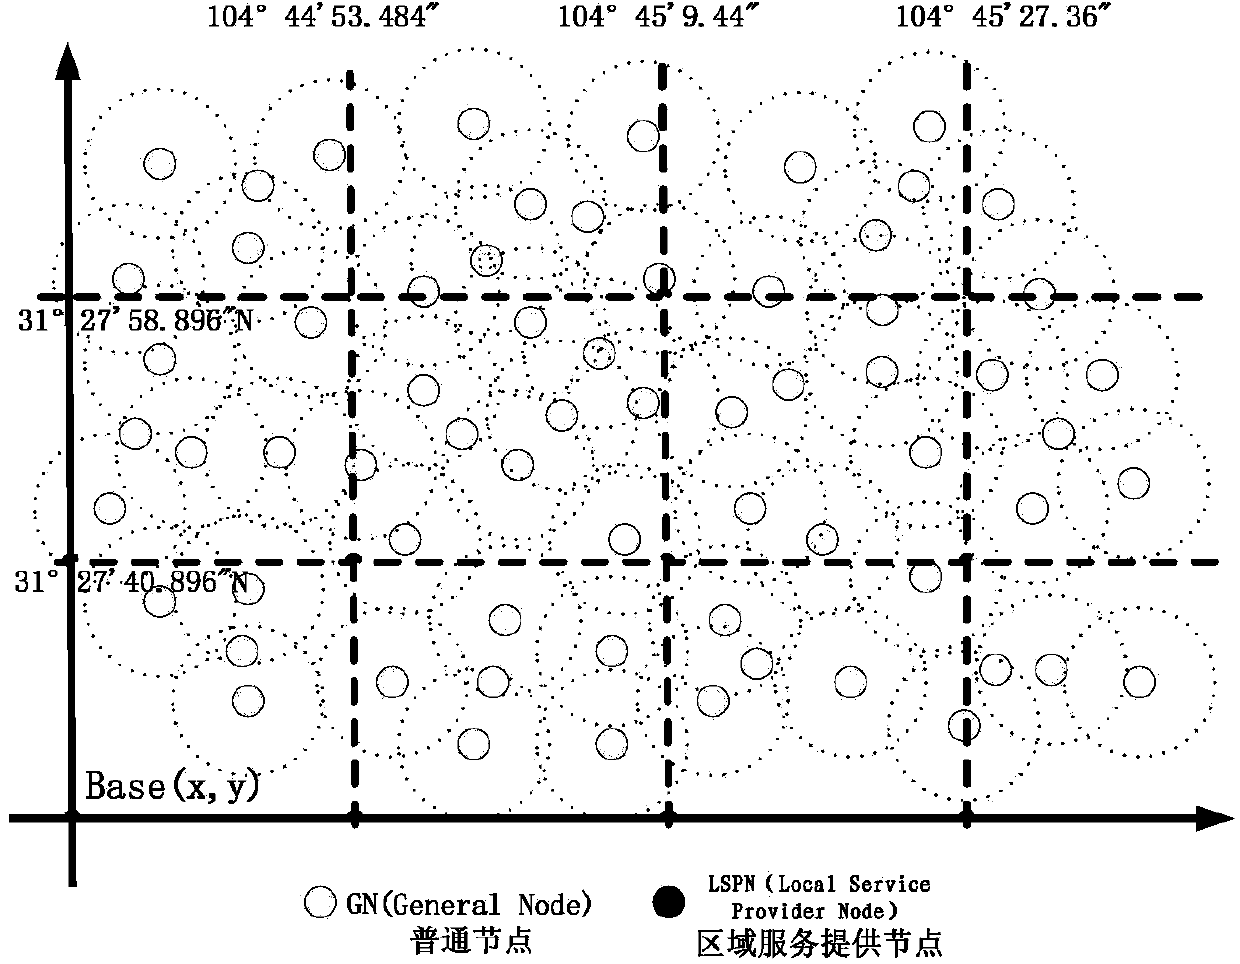 Mobile self-organizing network interrupt data recovery method based on area perception